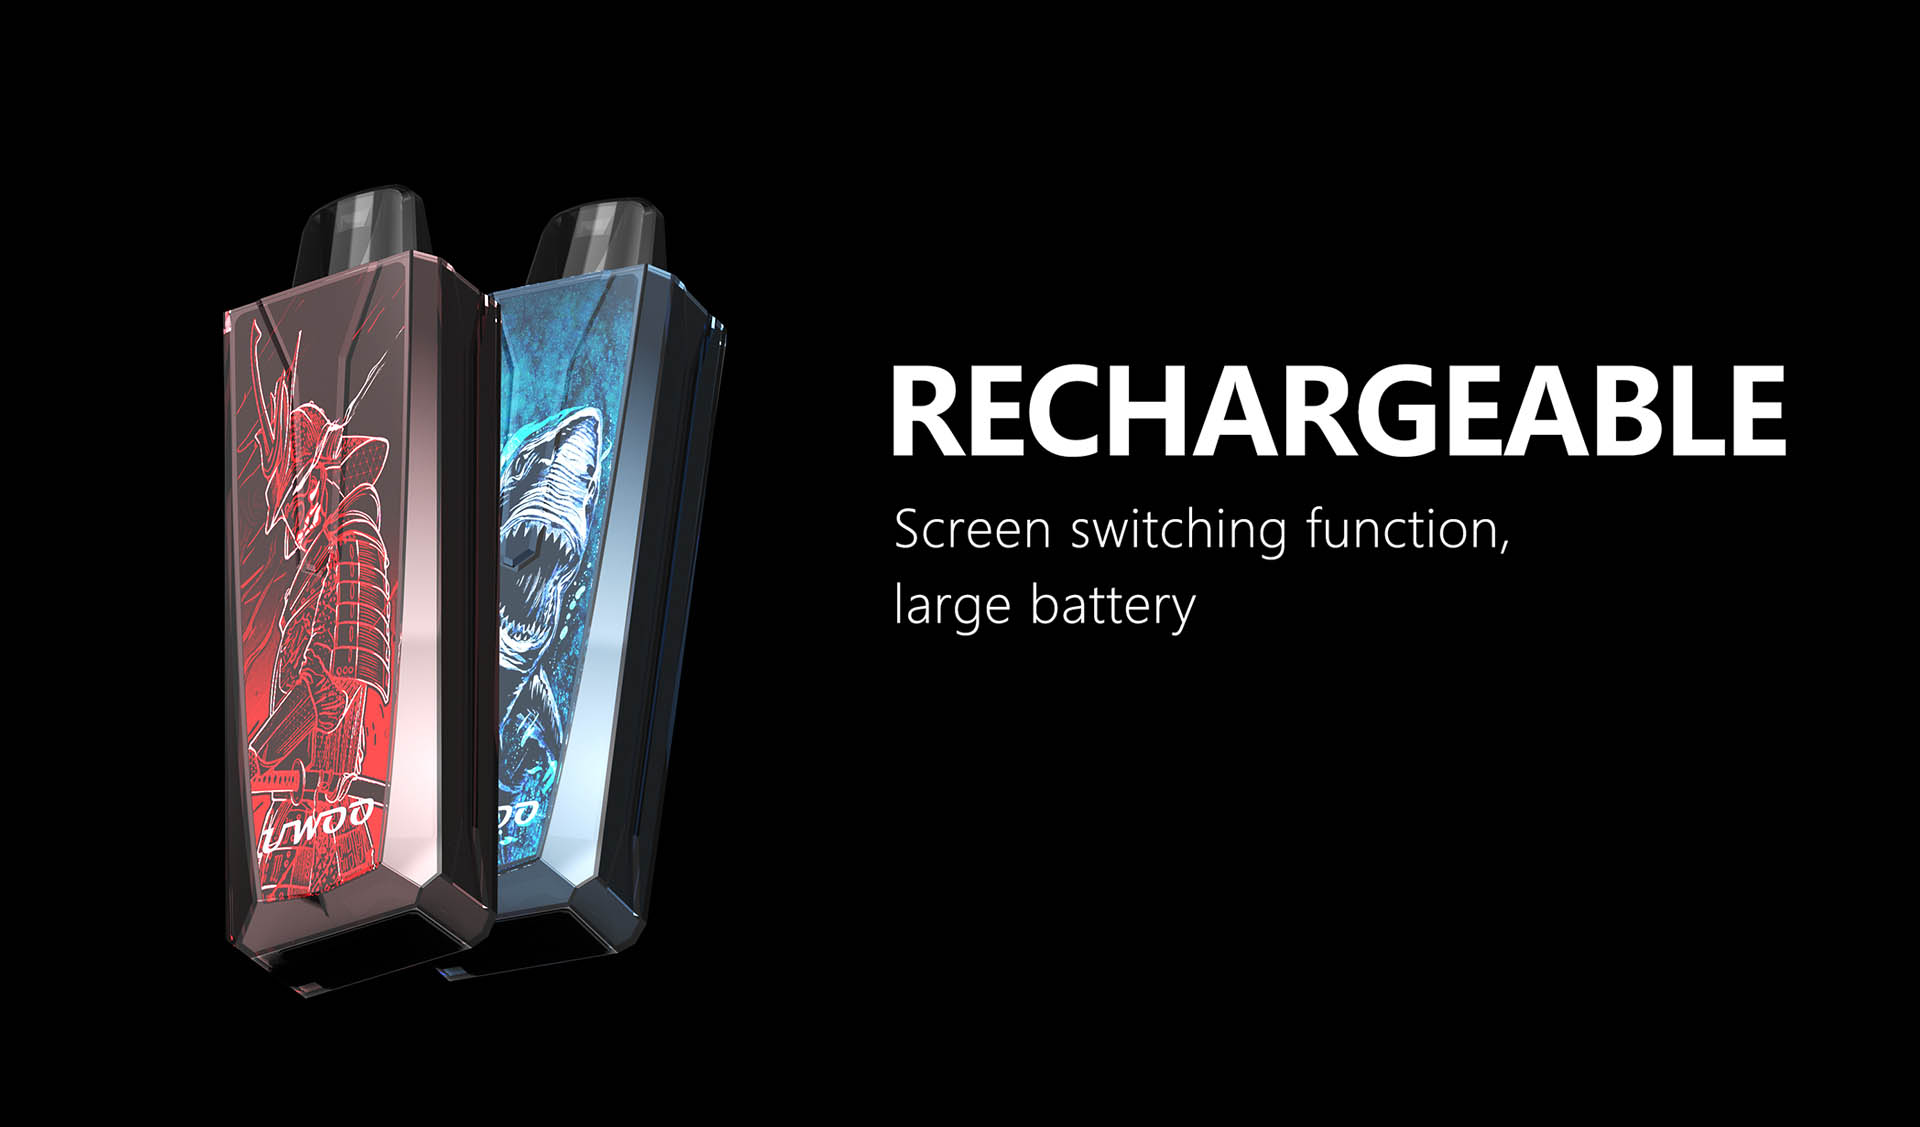 RECHARGEABLE Screen switching function, large battery